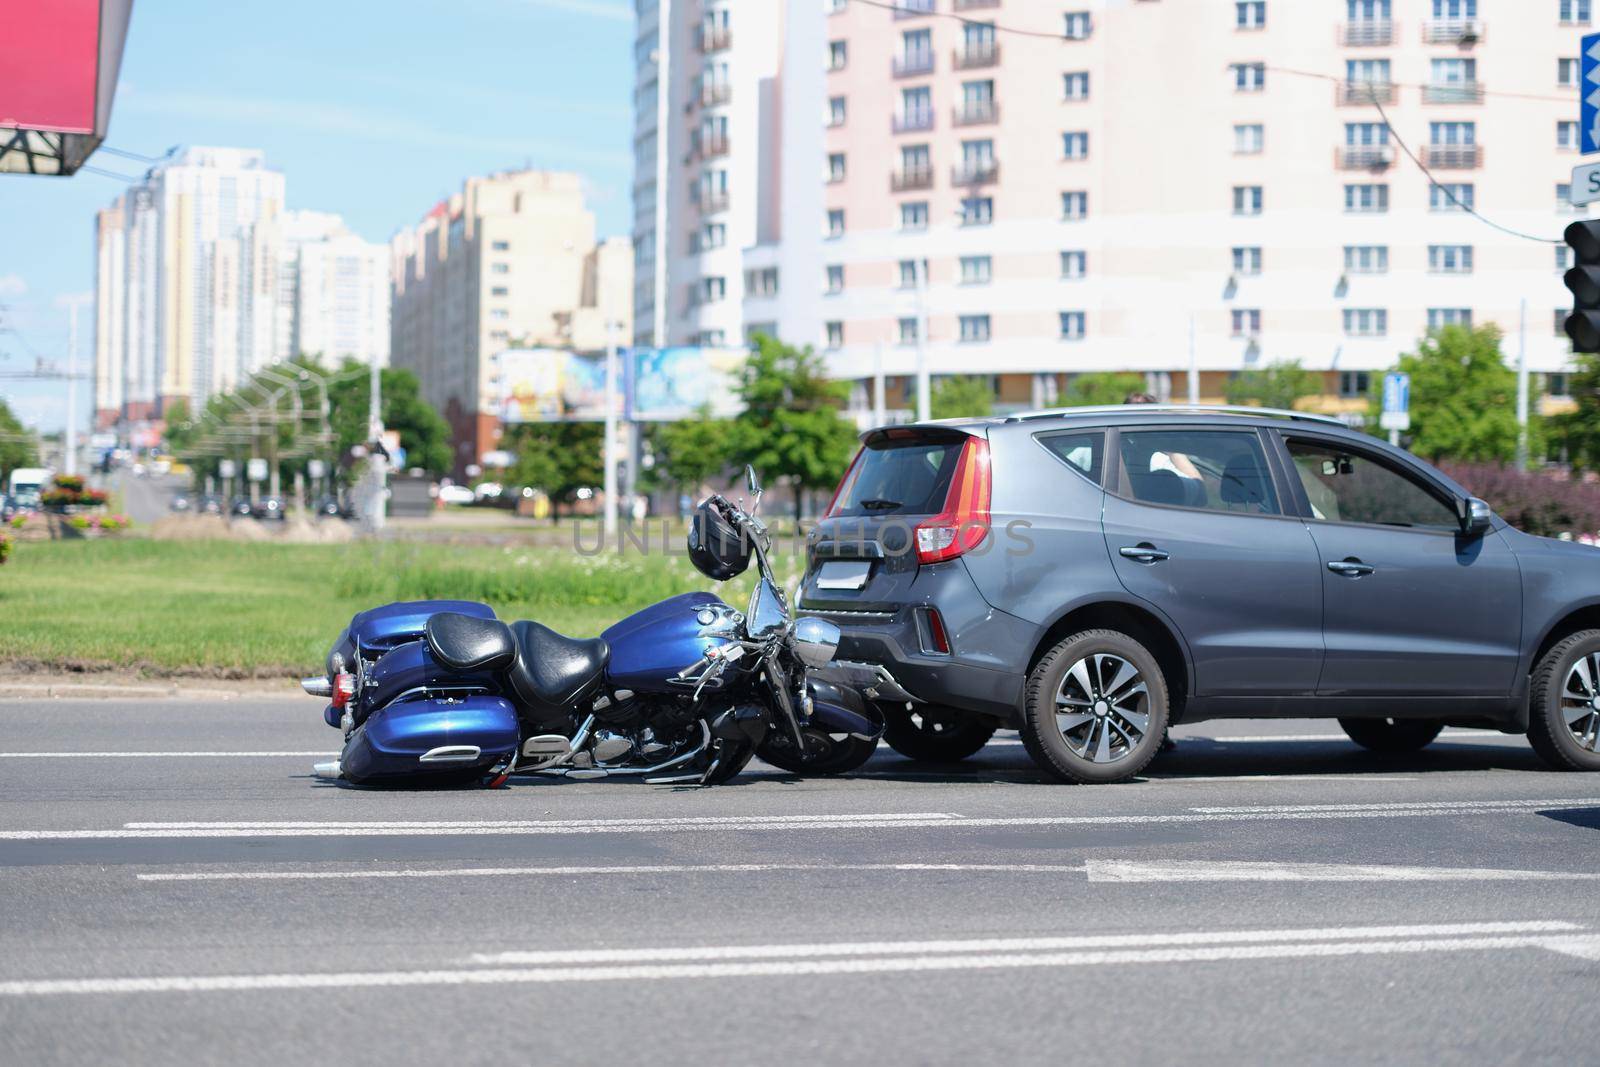 Portrait of traffic accident between electric bicycle and car, motorbike fell on asphalt, eyewitness man. Bike crashed into auto. Highway, accident concept